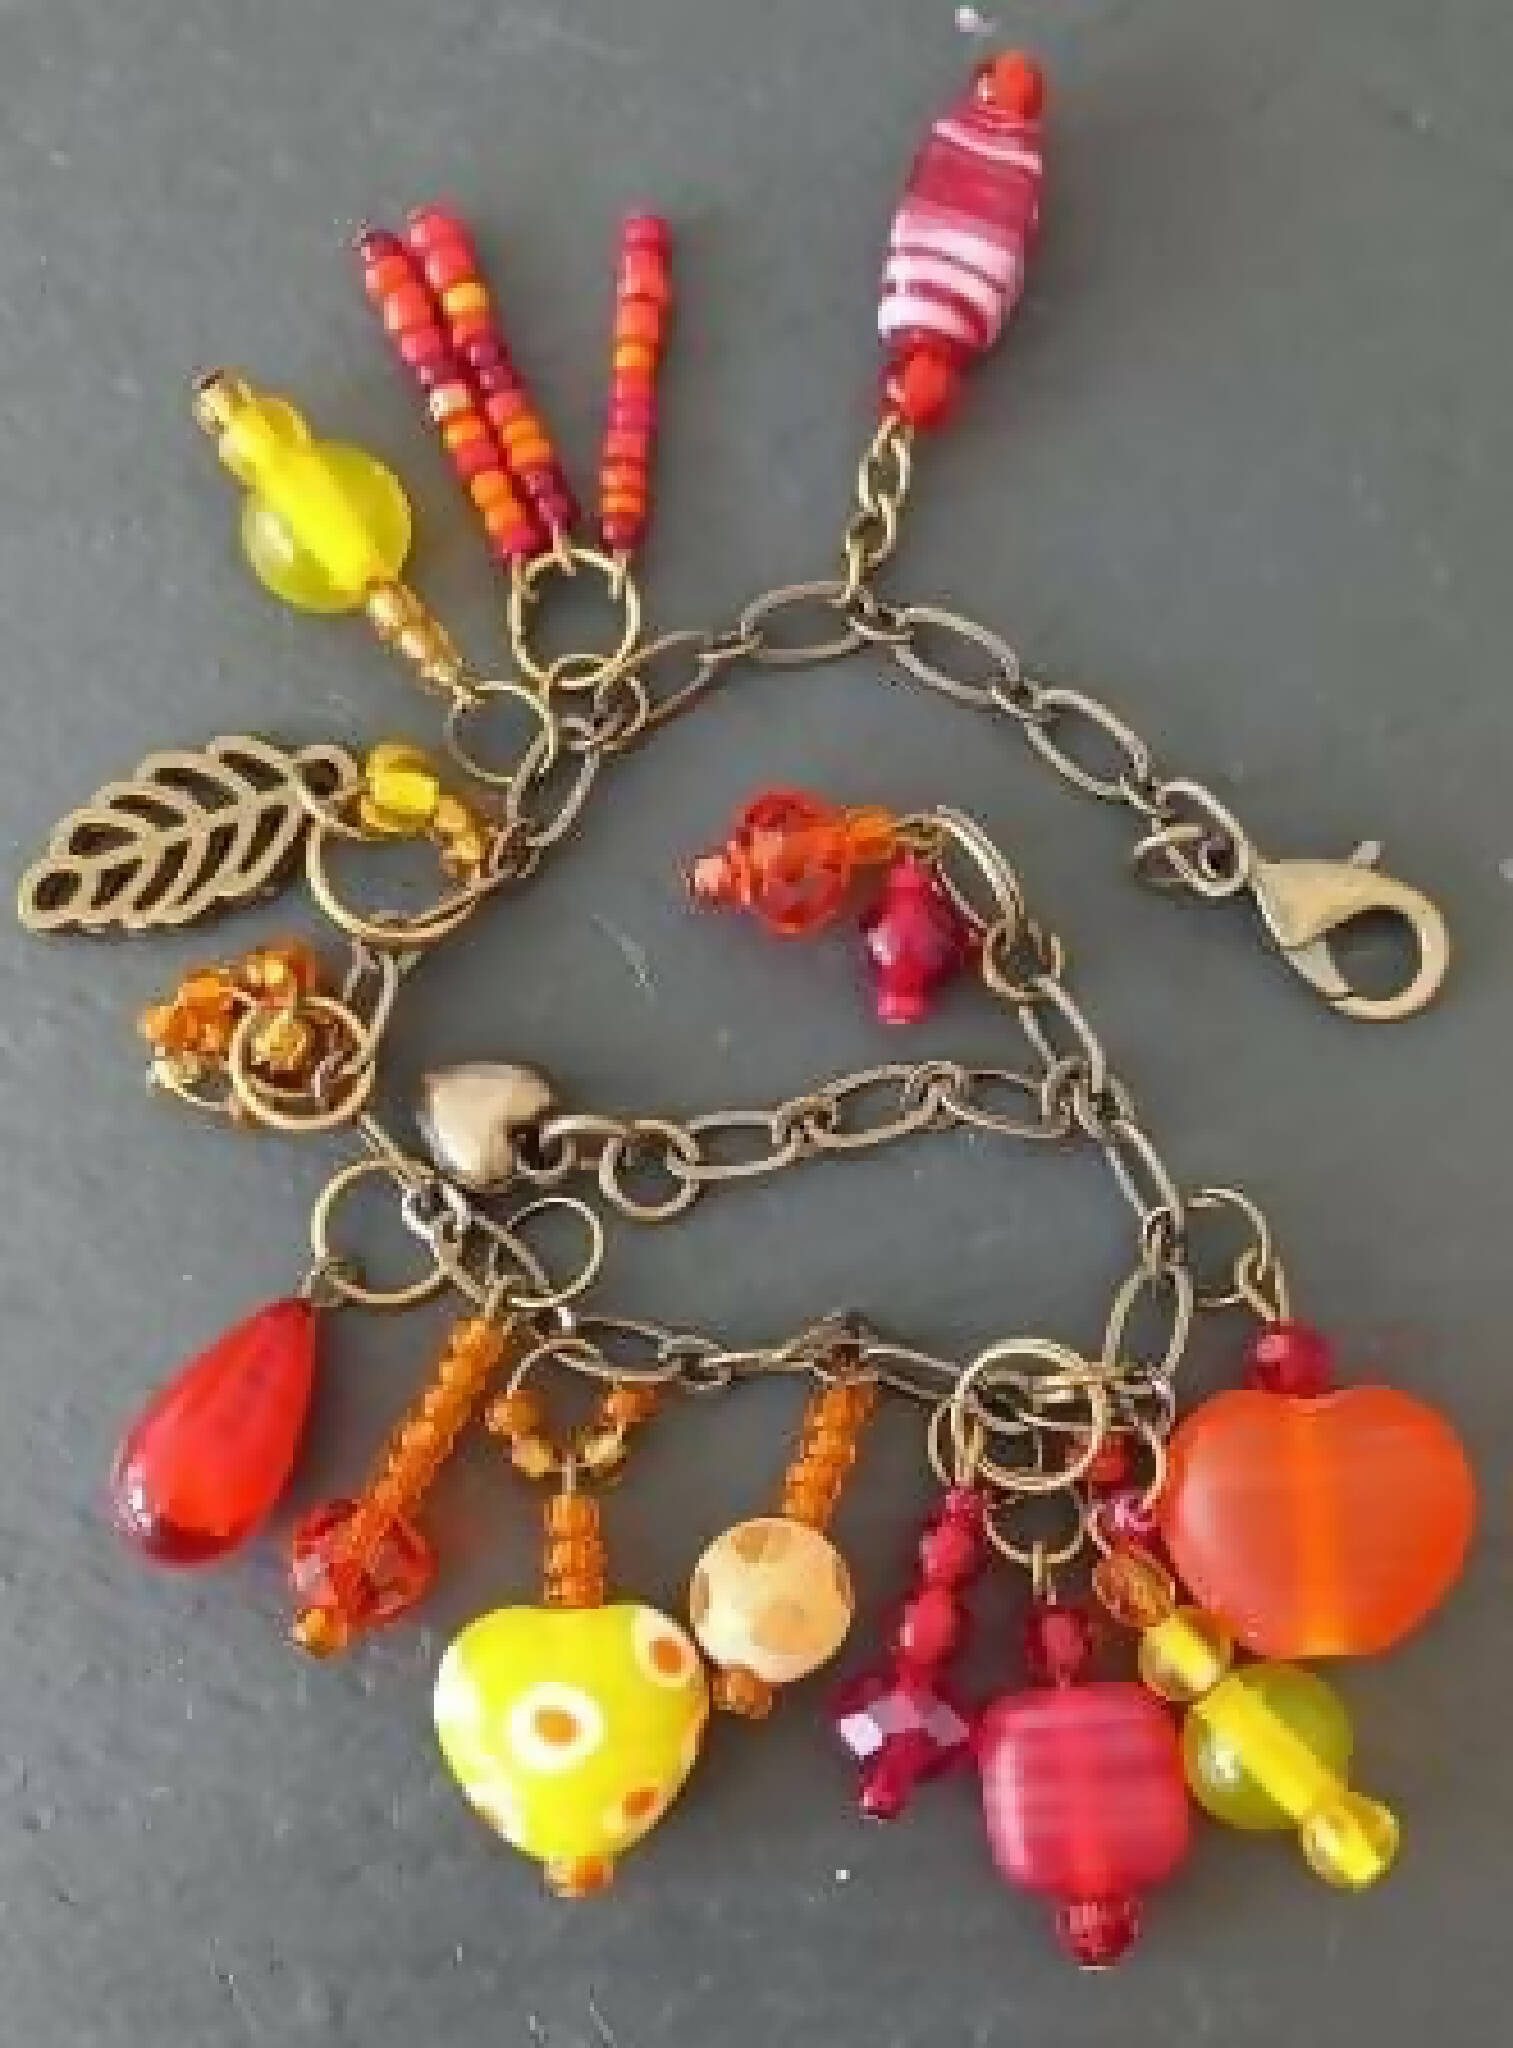 Charm Bracelet in Reds Yellows and Oranges